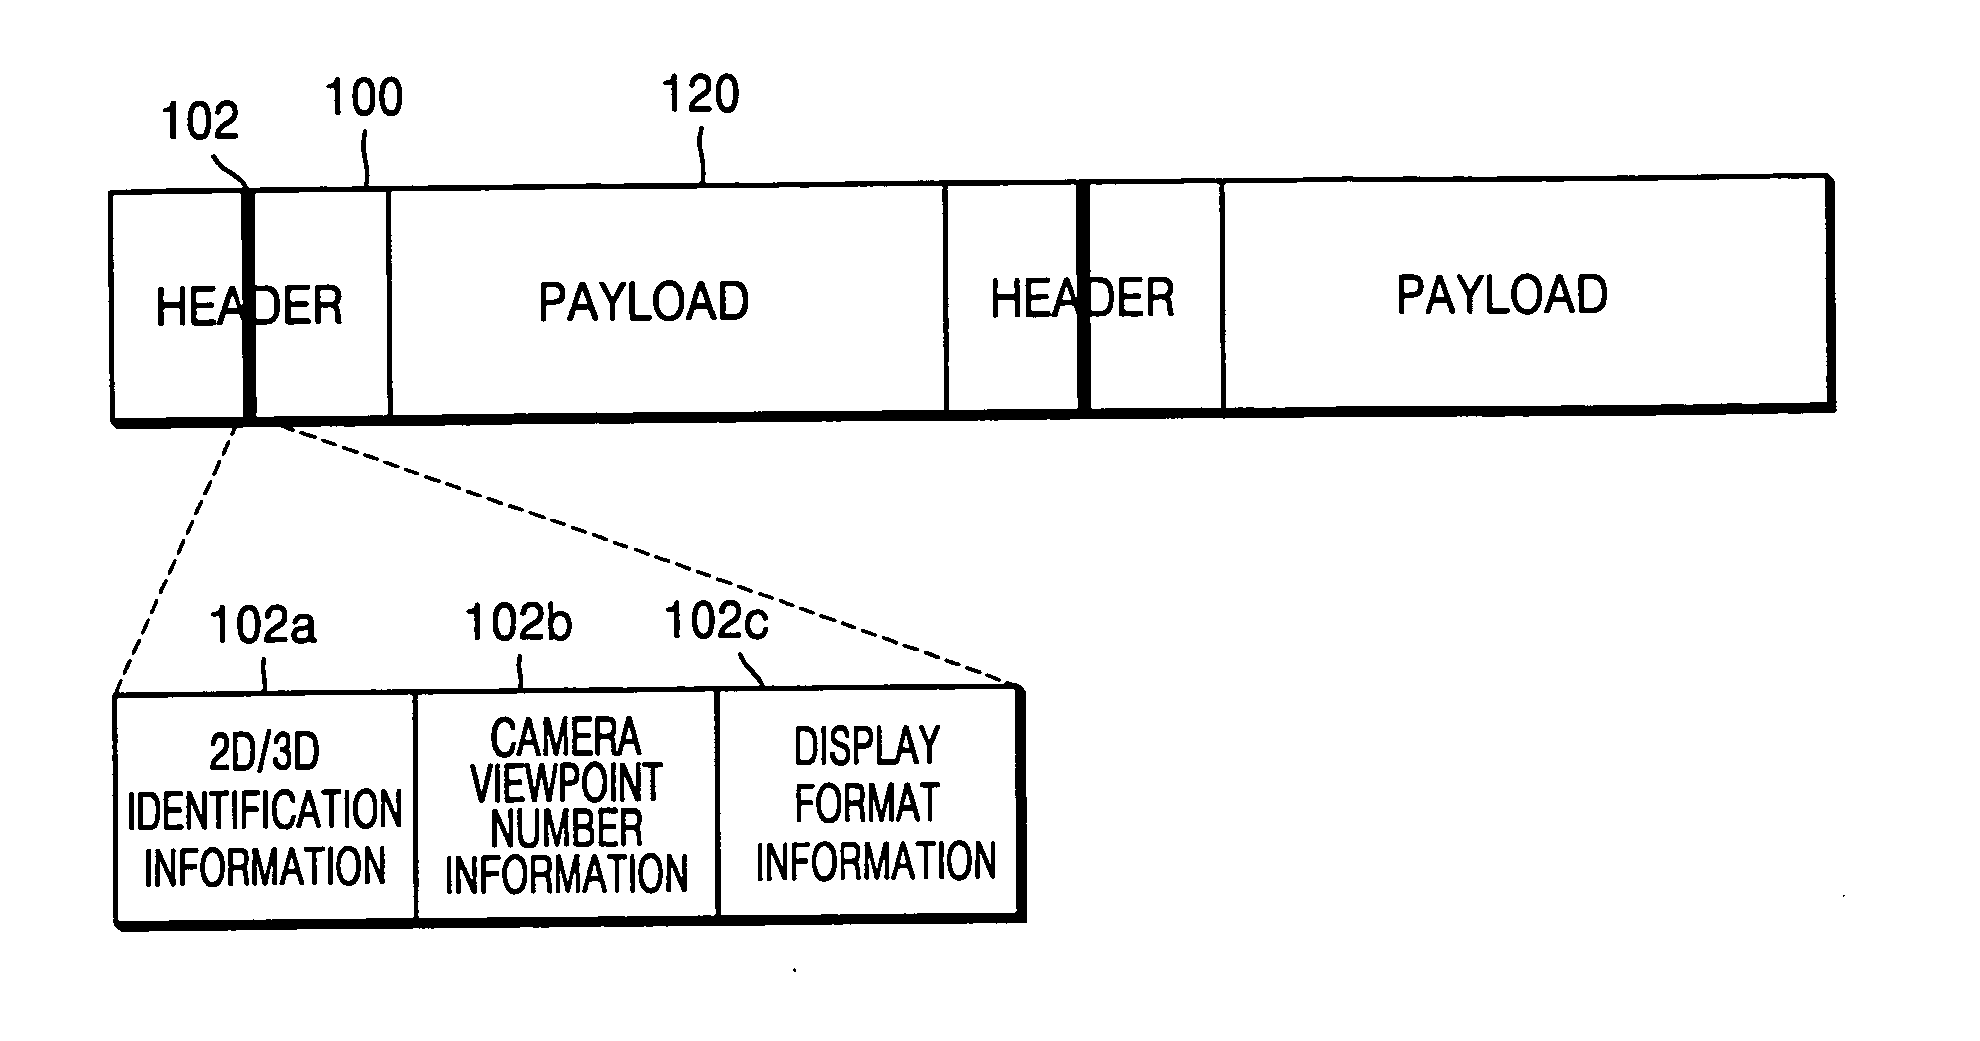 Transport stream structure including image data and apparatus and method for transmitting and receiving image data